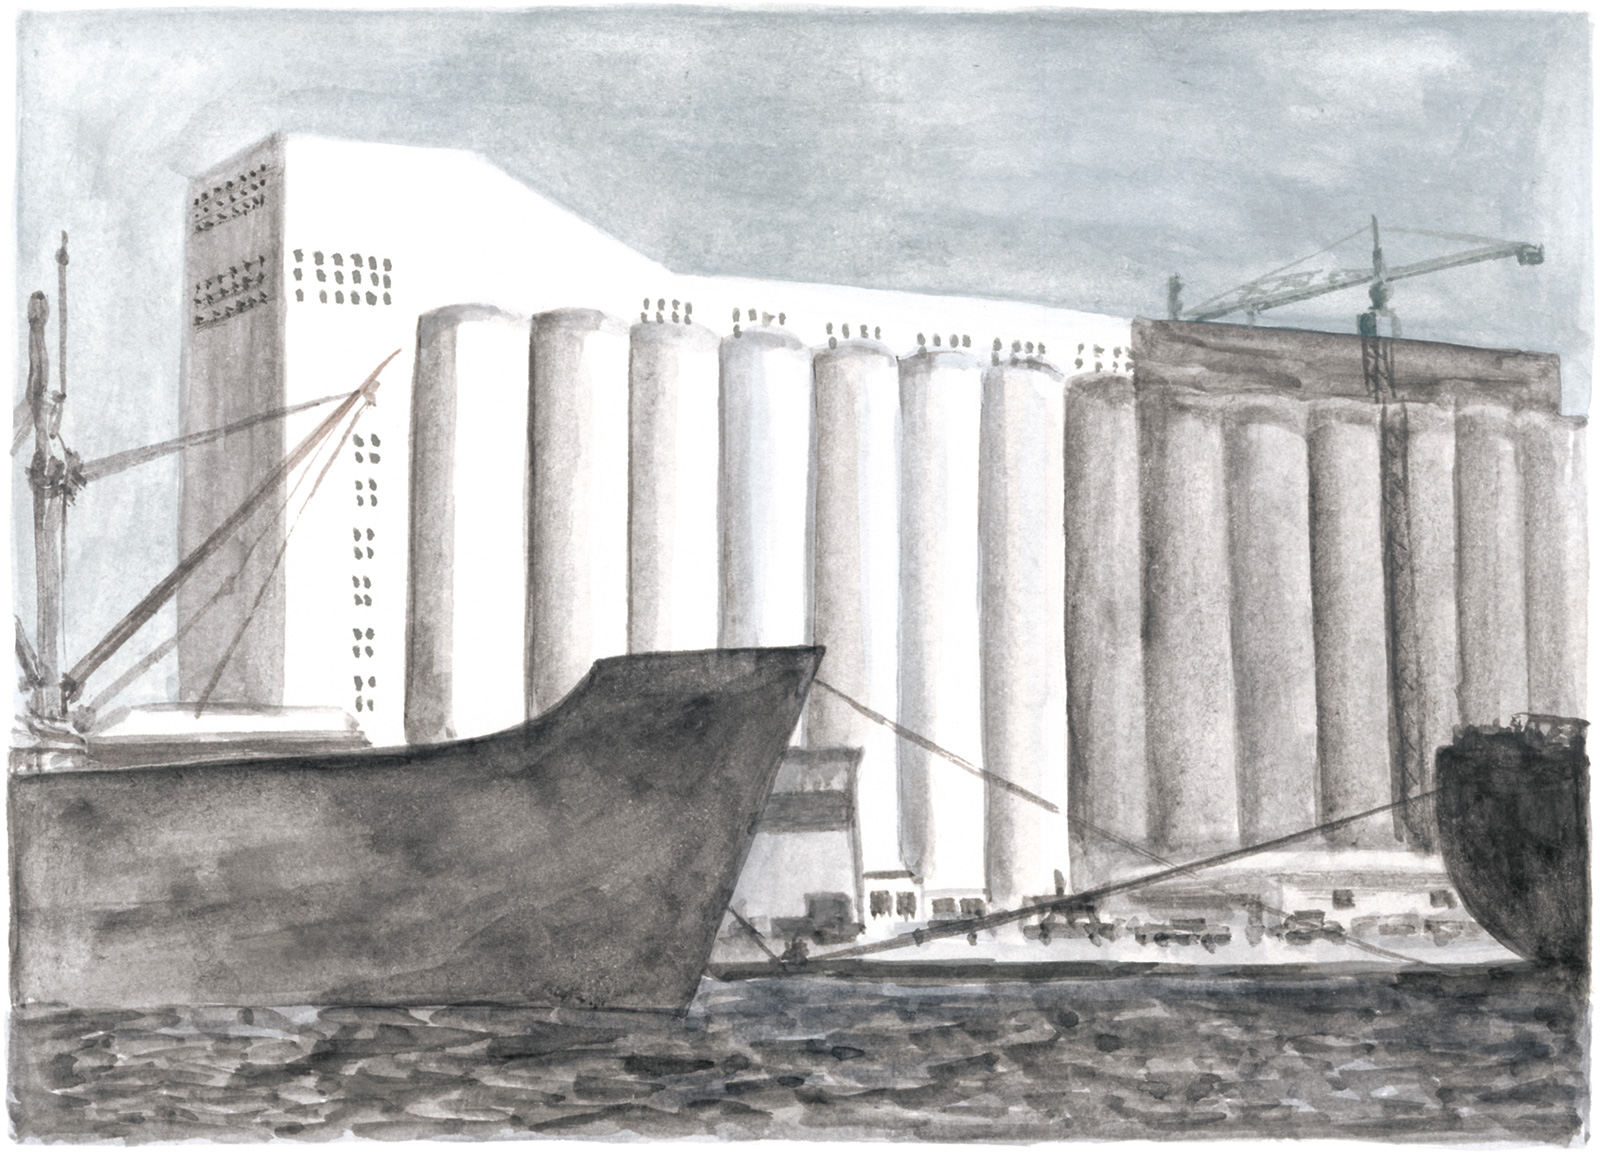 Grain silos at the port of Beirut under construction